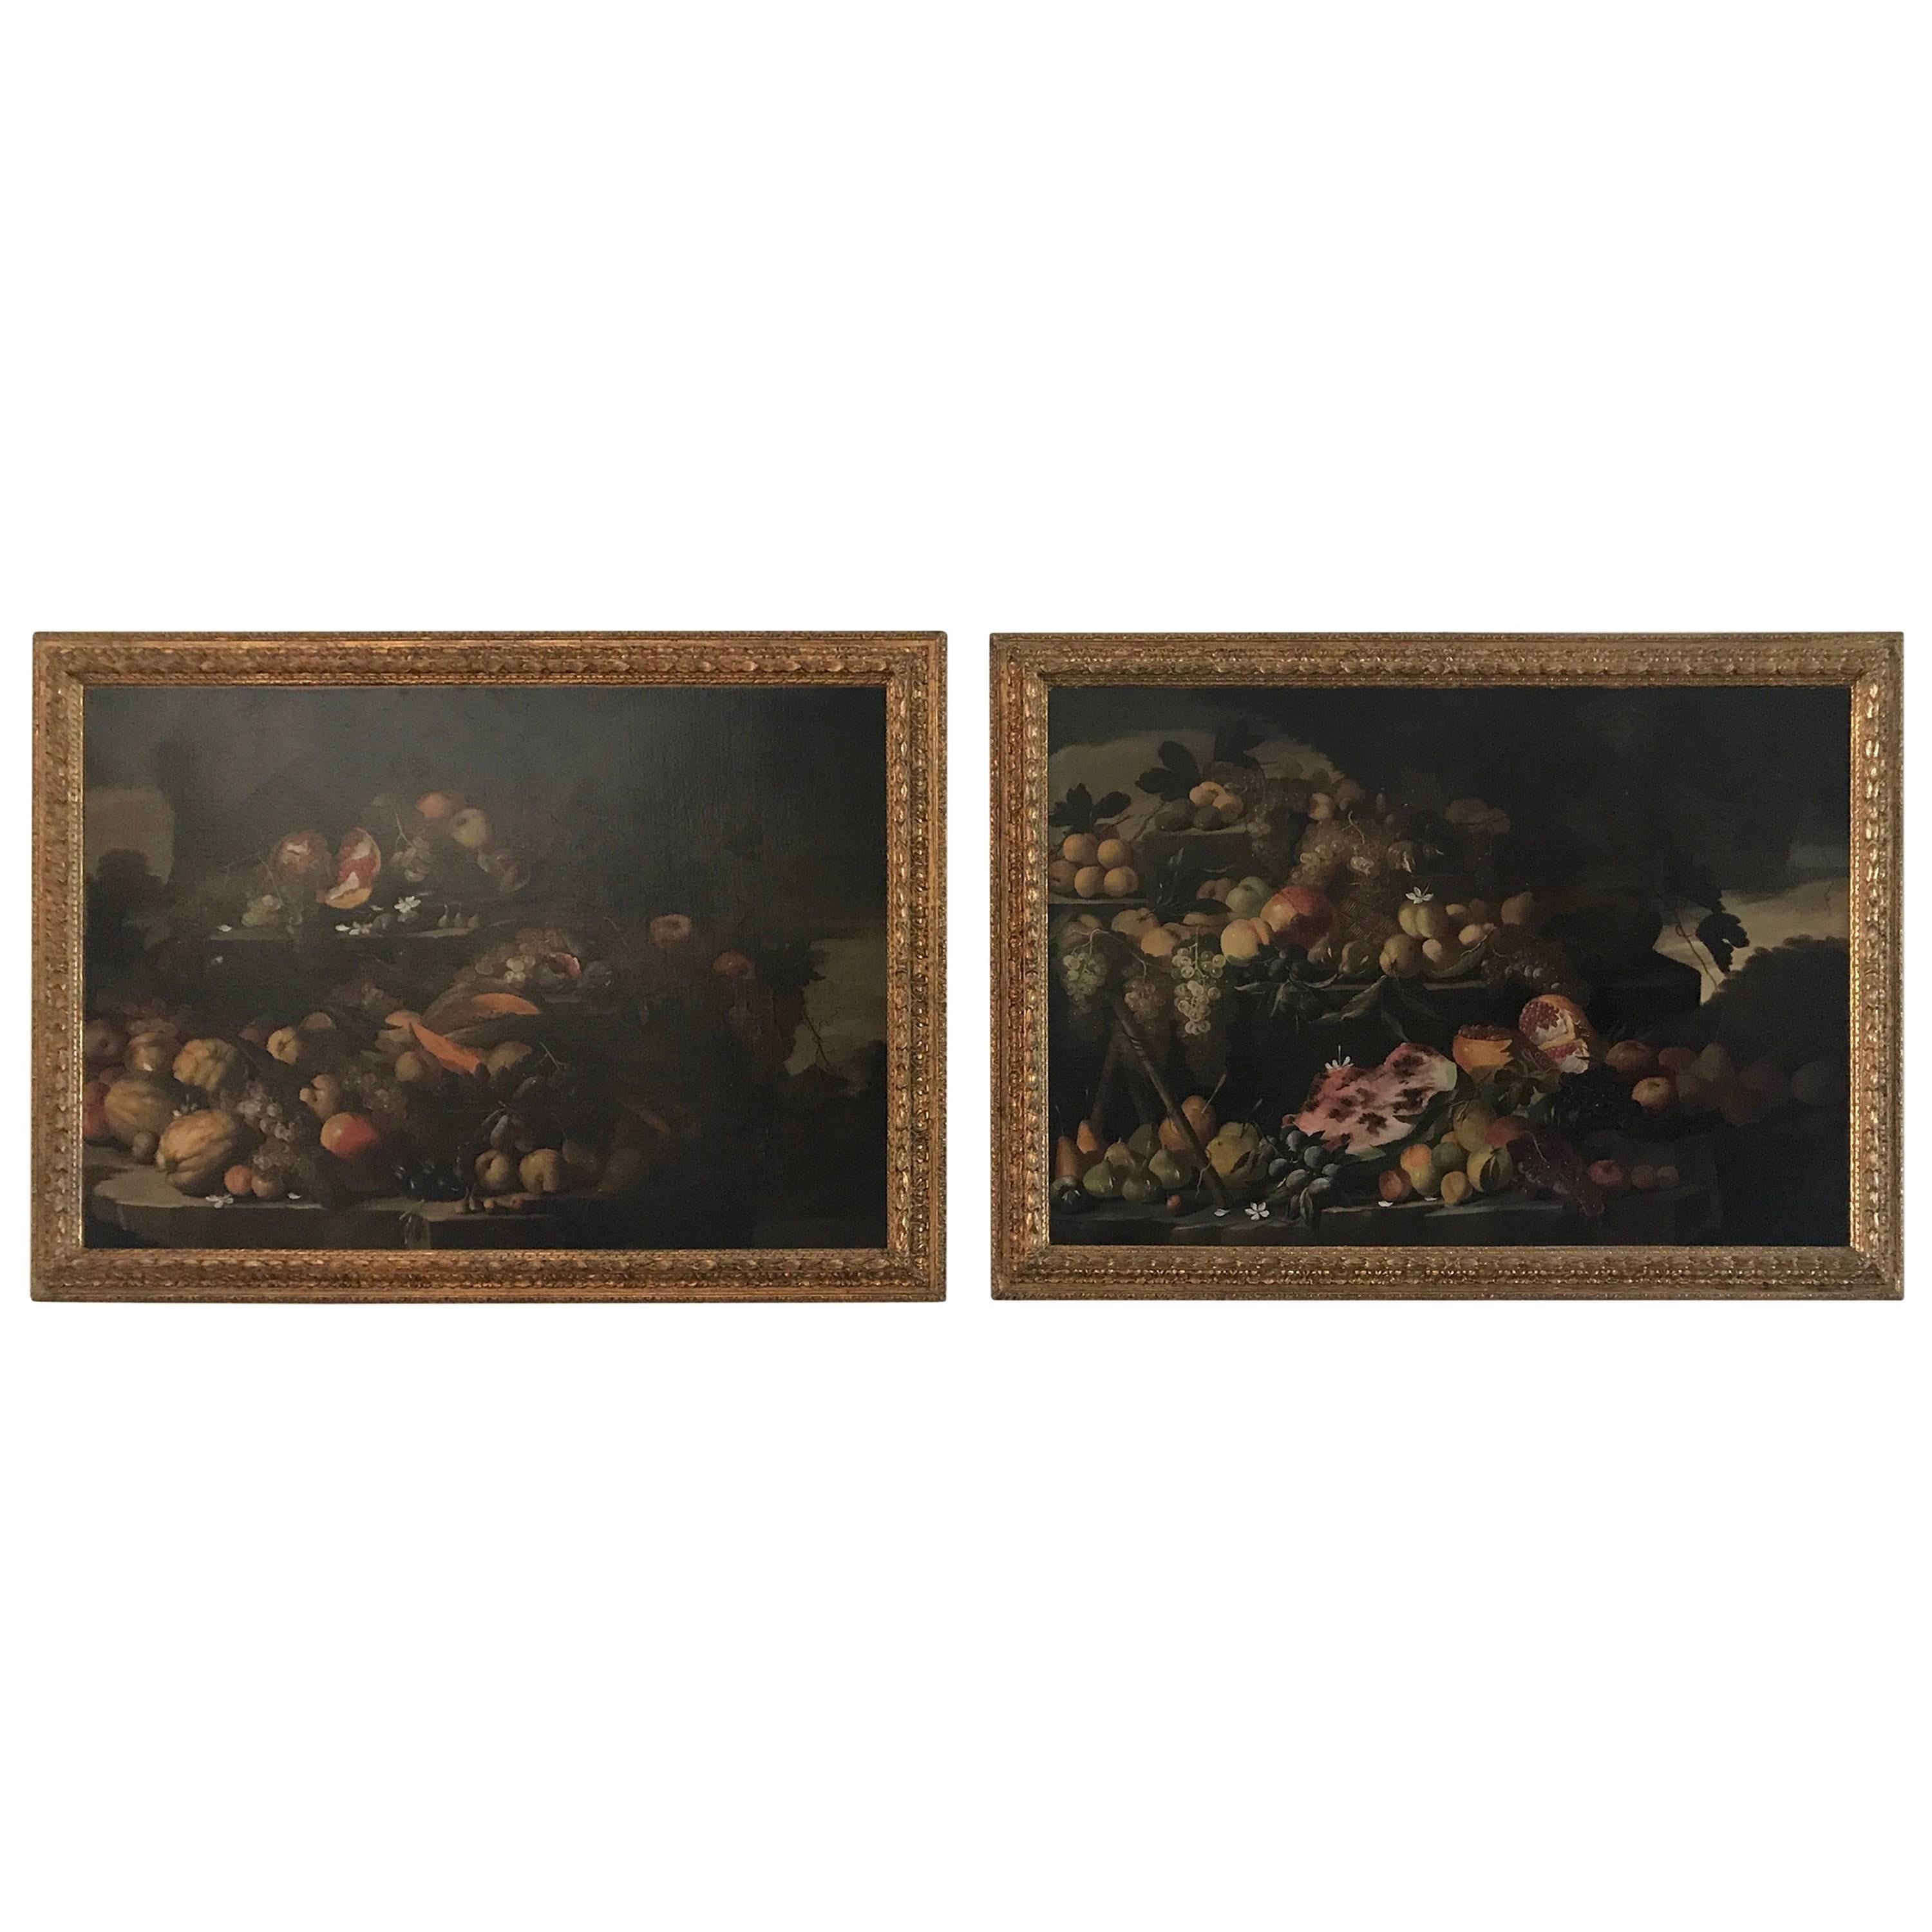 Pair of Italians "Still Life" Paintings by Luca Forte, Naples, 1600-1605